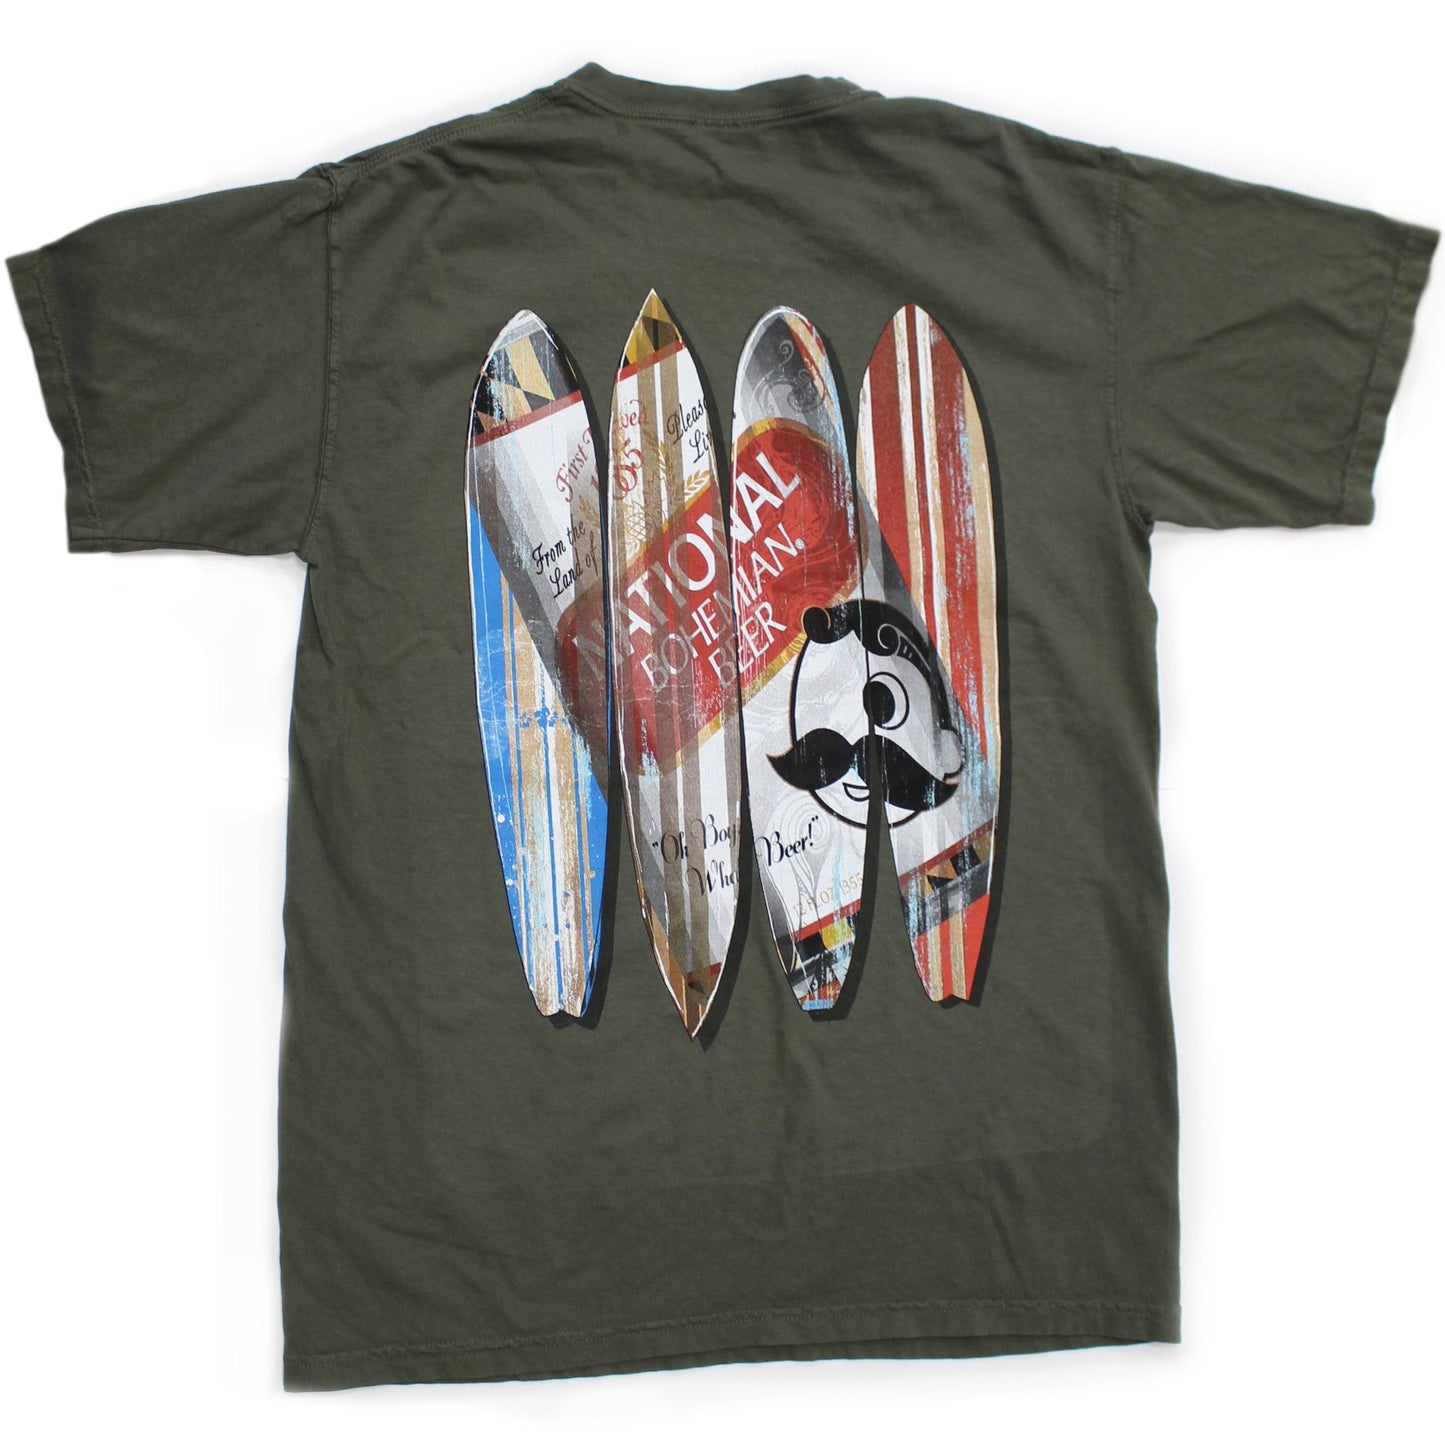 Natty Boh Can Surfboards (Sage) / Shirt - Route One Apparel